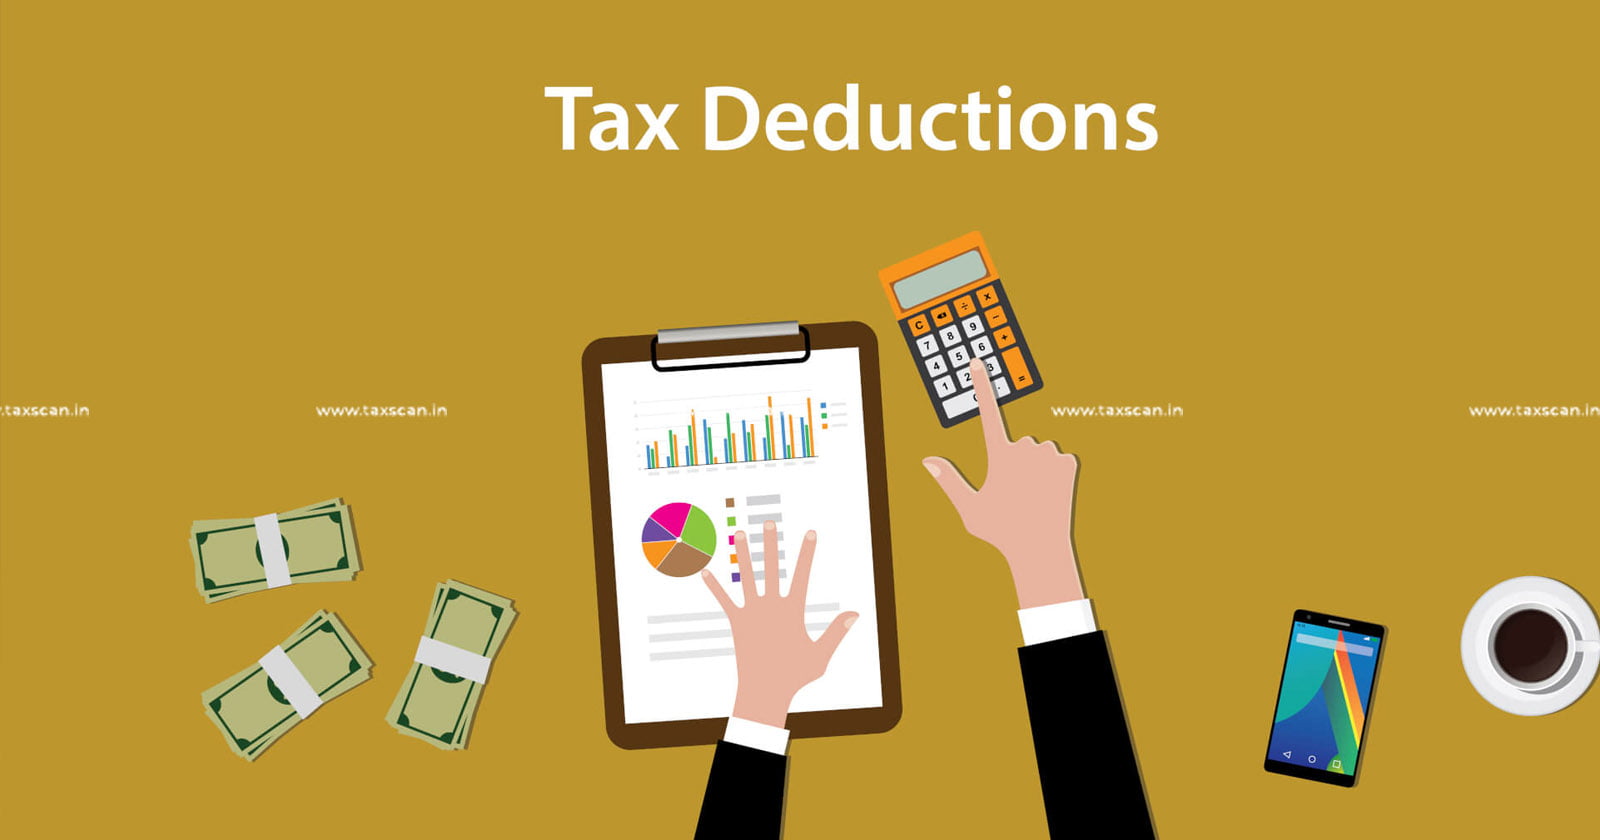 Tax Deductions - Tax Deductions in India - Understanding Section 80C - taxscan